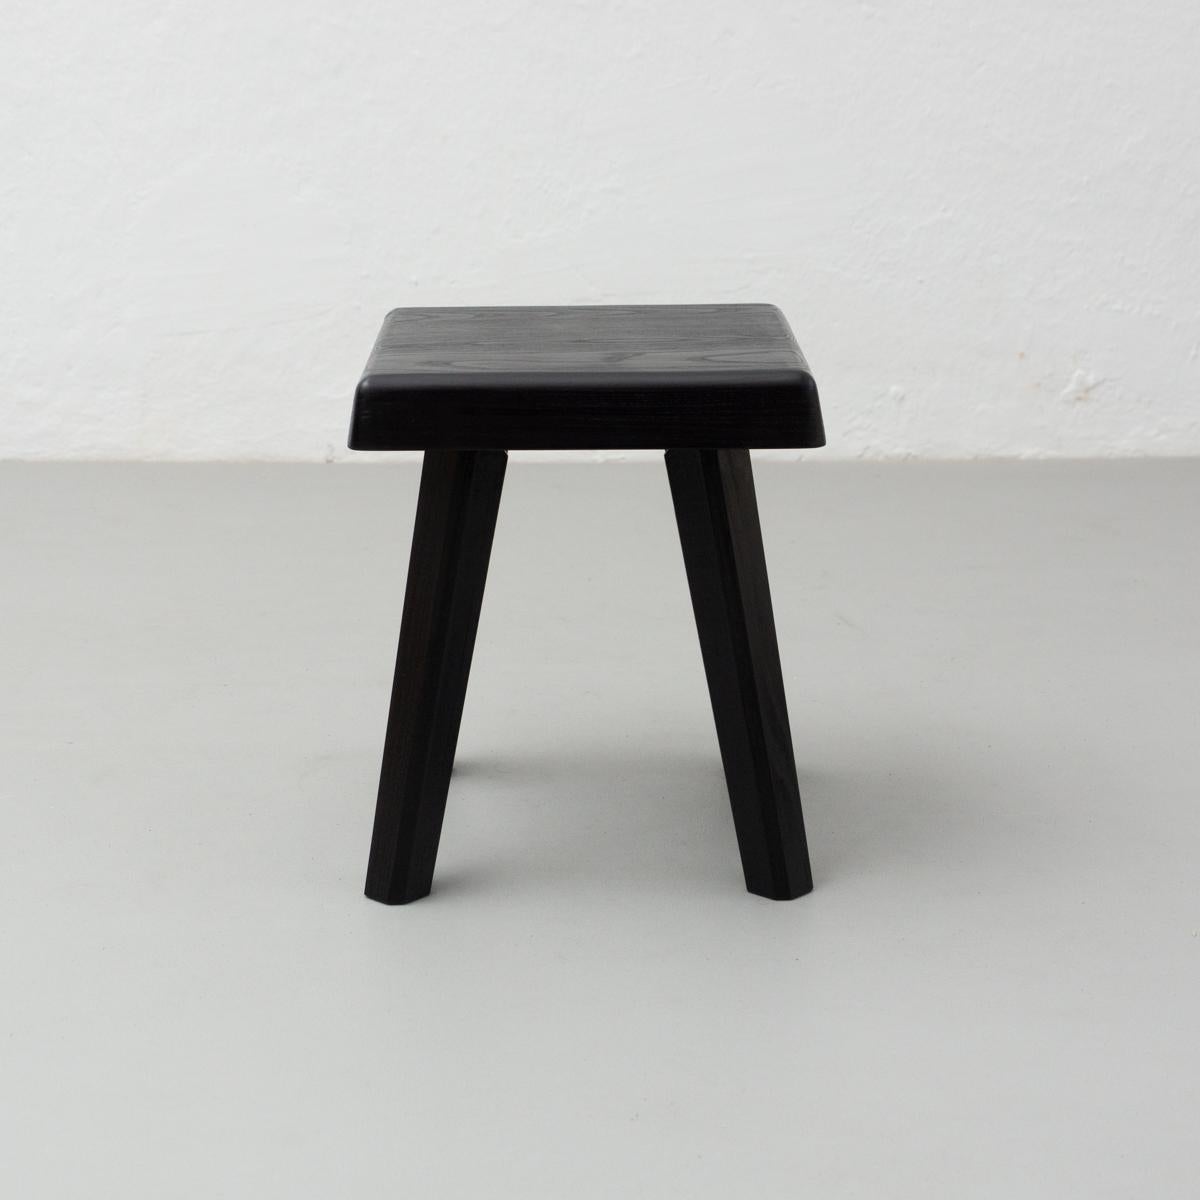 Stool designed by Pierre Chapo in 1960s.
Manufactured by Chapo Creation, 2019, France.

In original condition, with minor wear consistent with age and use, preserving a beautiful patina.

Materials:
Oakwood

Dimensions:
D 28.4 cm x W 28.4